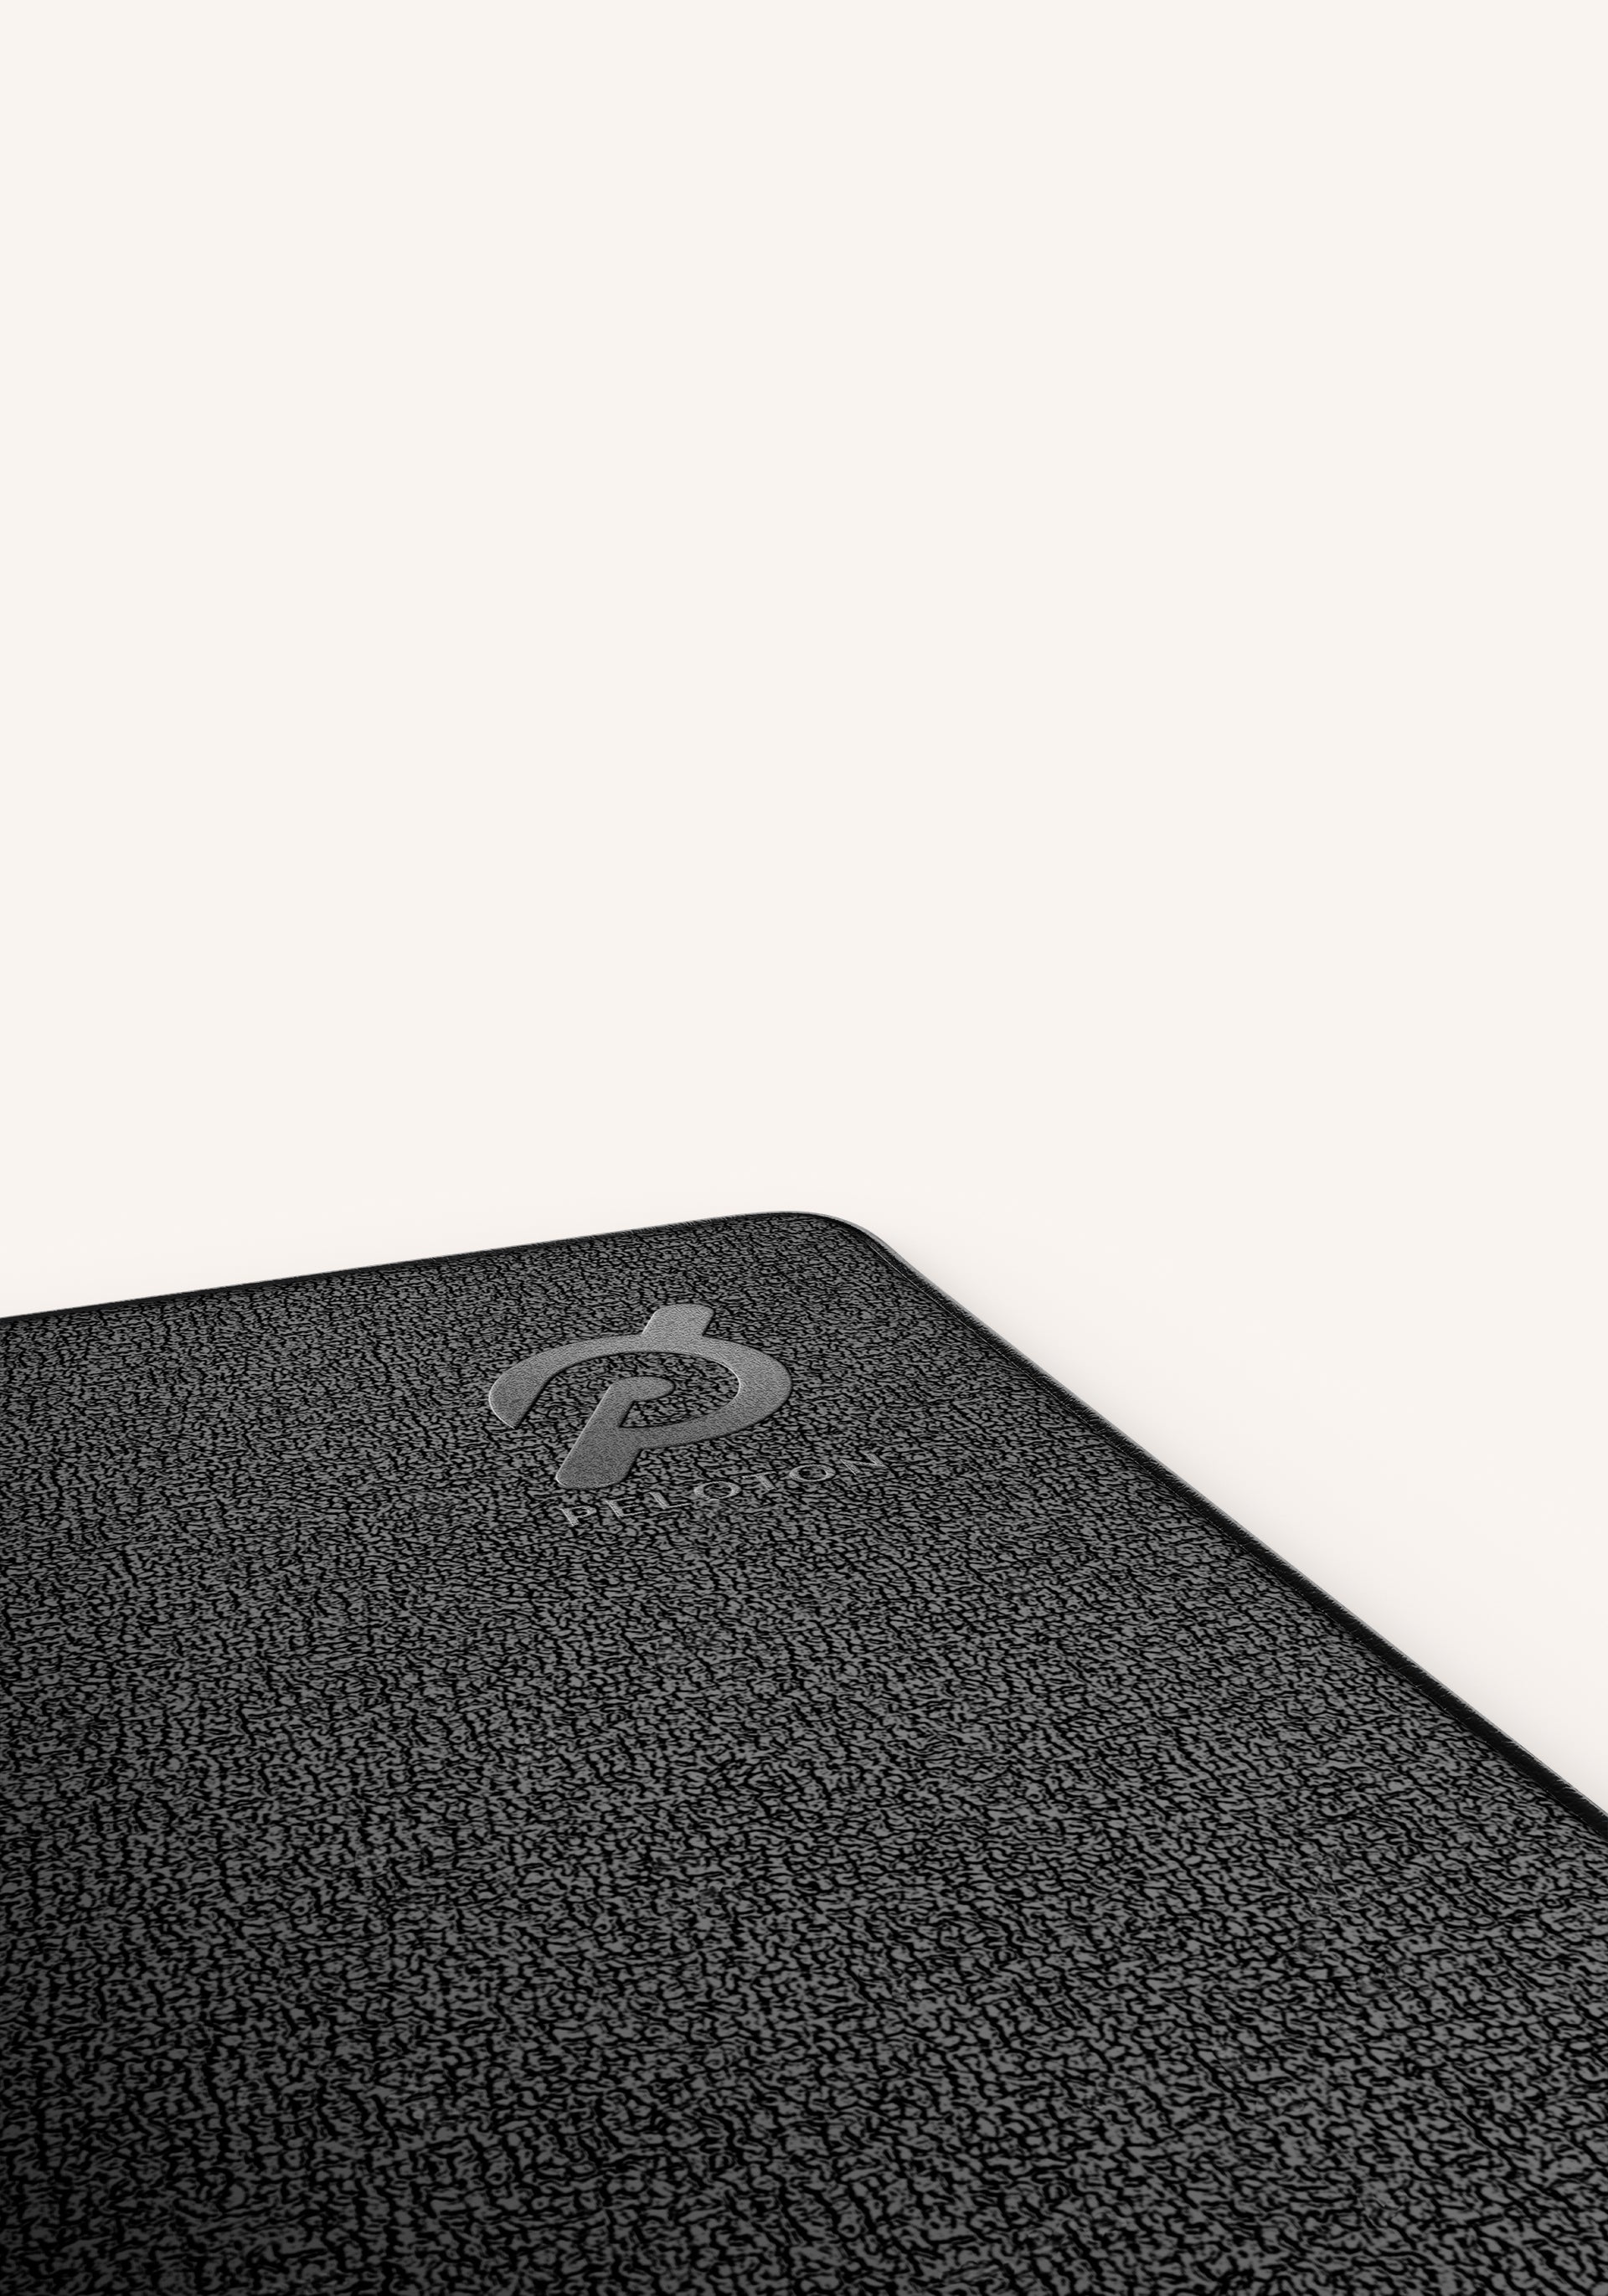 This Peloton workout mat is down 40% to its lowest-ever price